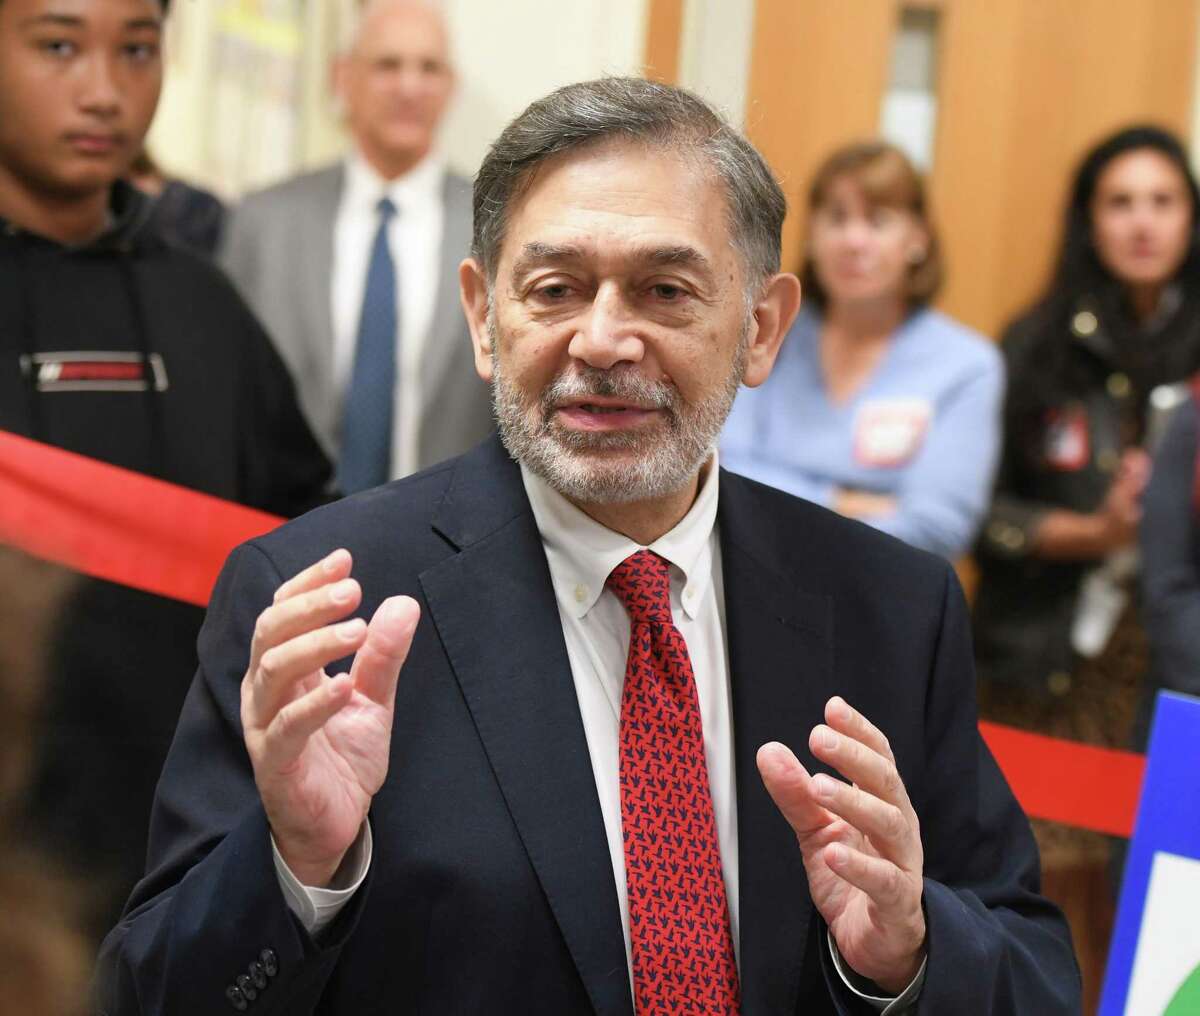 GHS Interim Headmaster Ralph Mayo speaks at the ribbon-cutting of the new Education & Wellness Center wing at Greenwich High School in Greenwich, Conn. Tuesday, Oct. 8, 2019. The Center addresses the complex emotional, academic and behavioral issues of students in a therapeutic and structured setting to support positive mental health and academics.